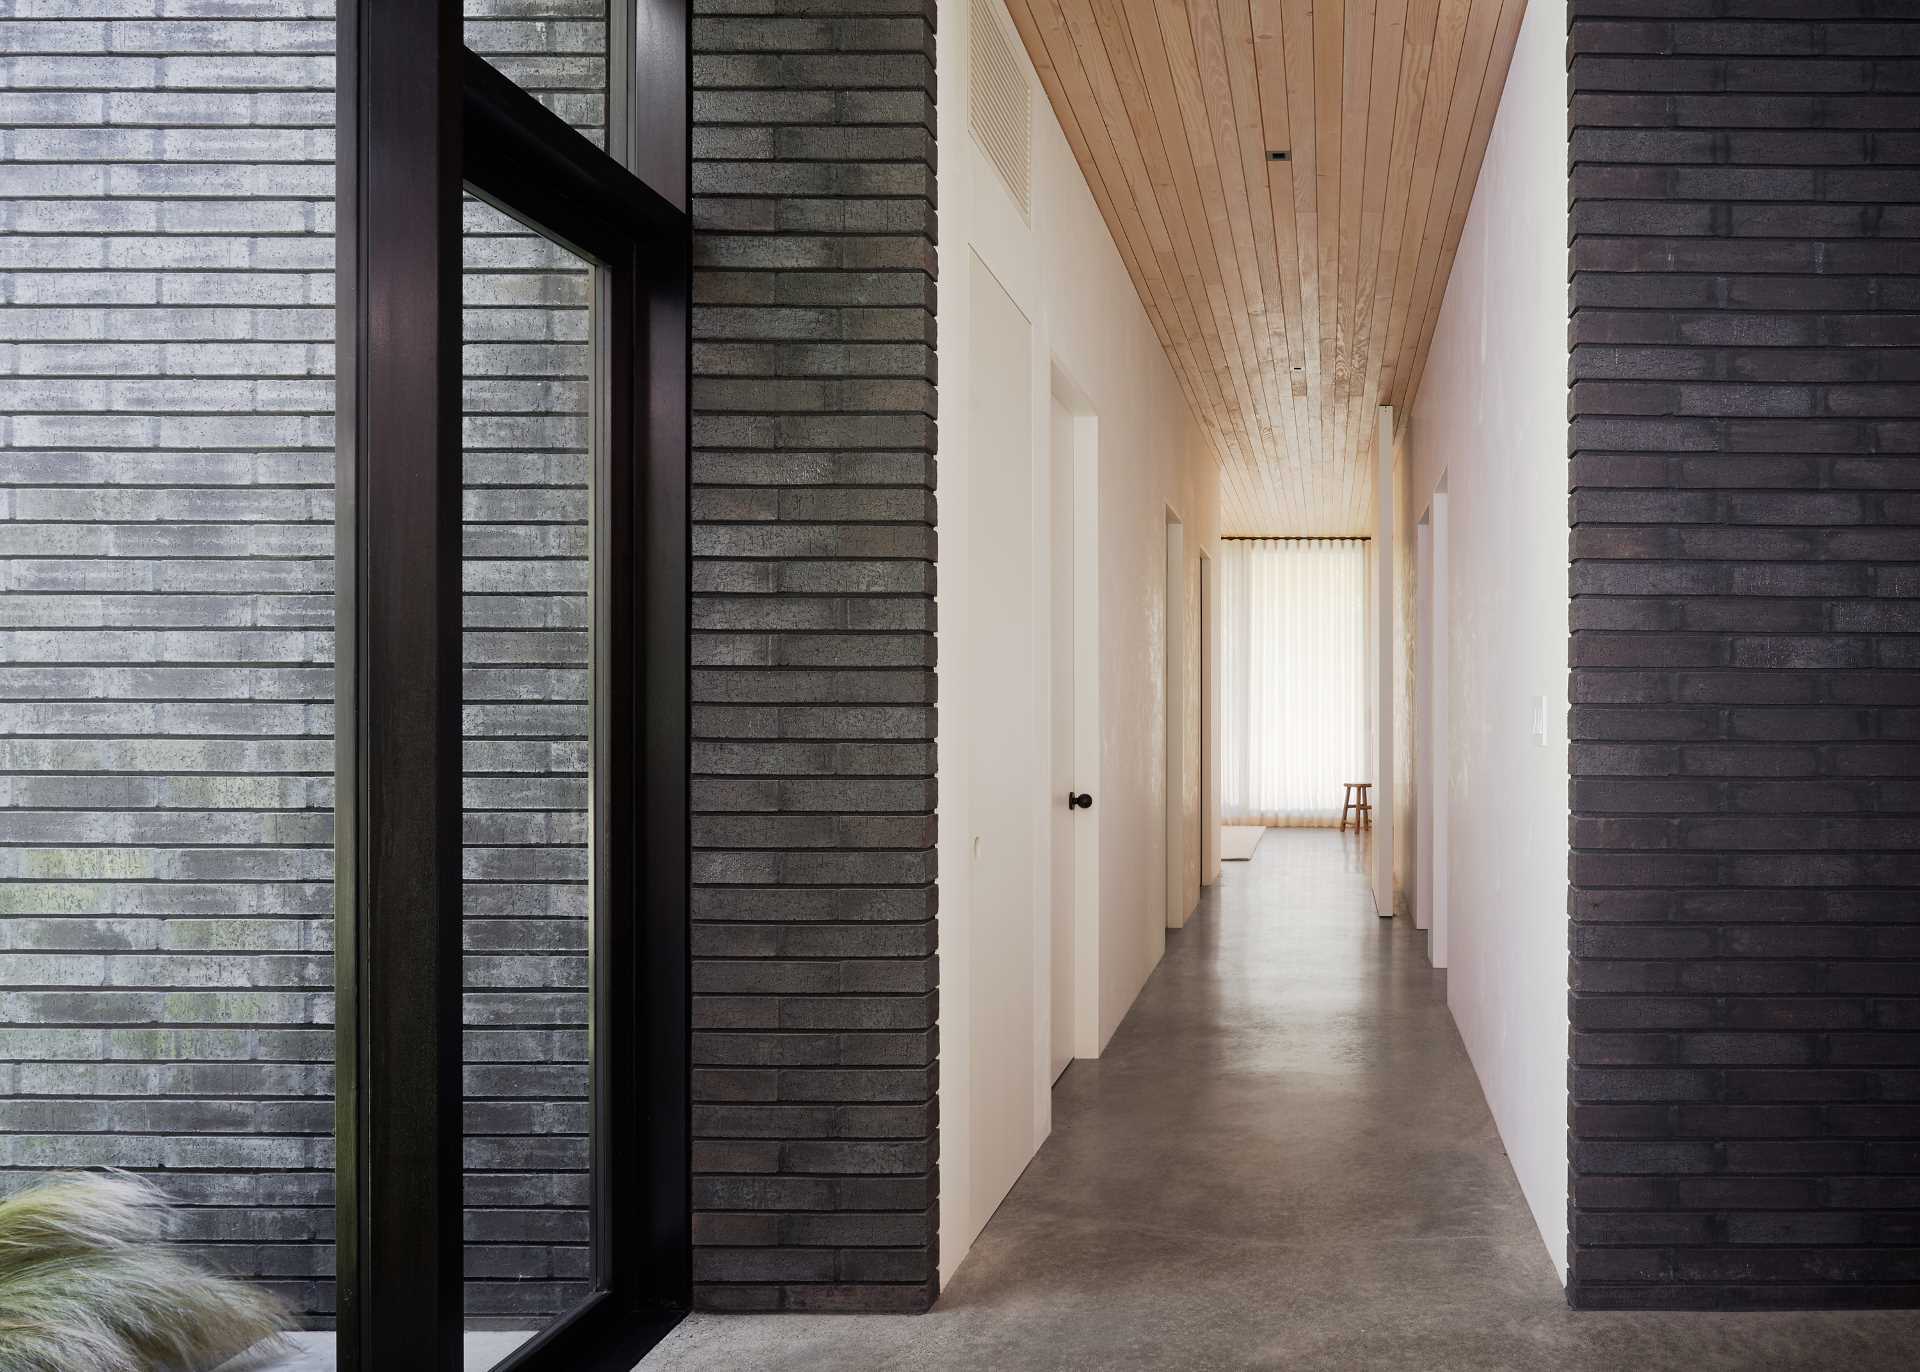 A long hallway in this modern home leads from the entryway to the bedrooms and bathrooms.